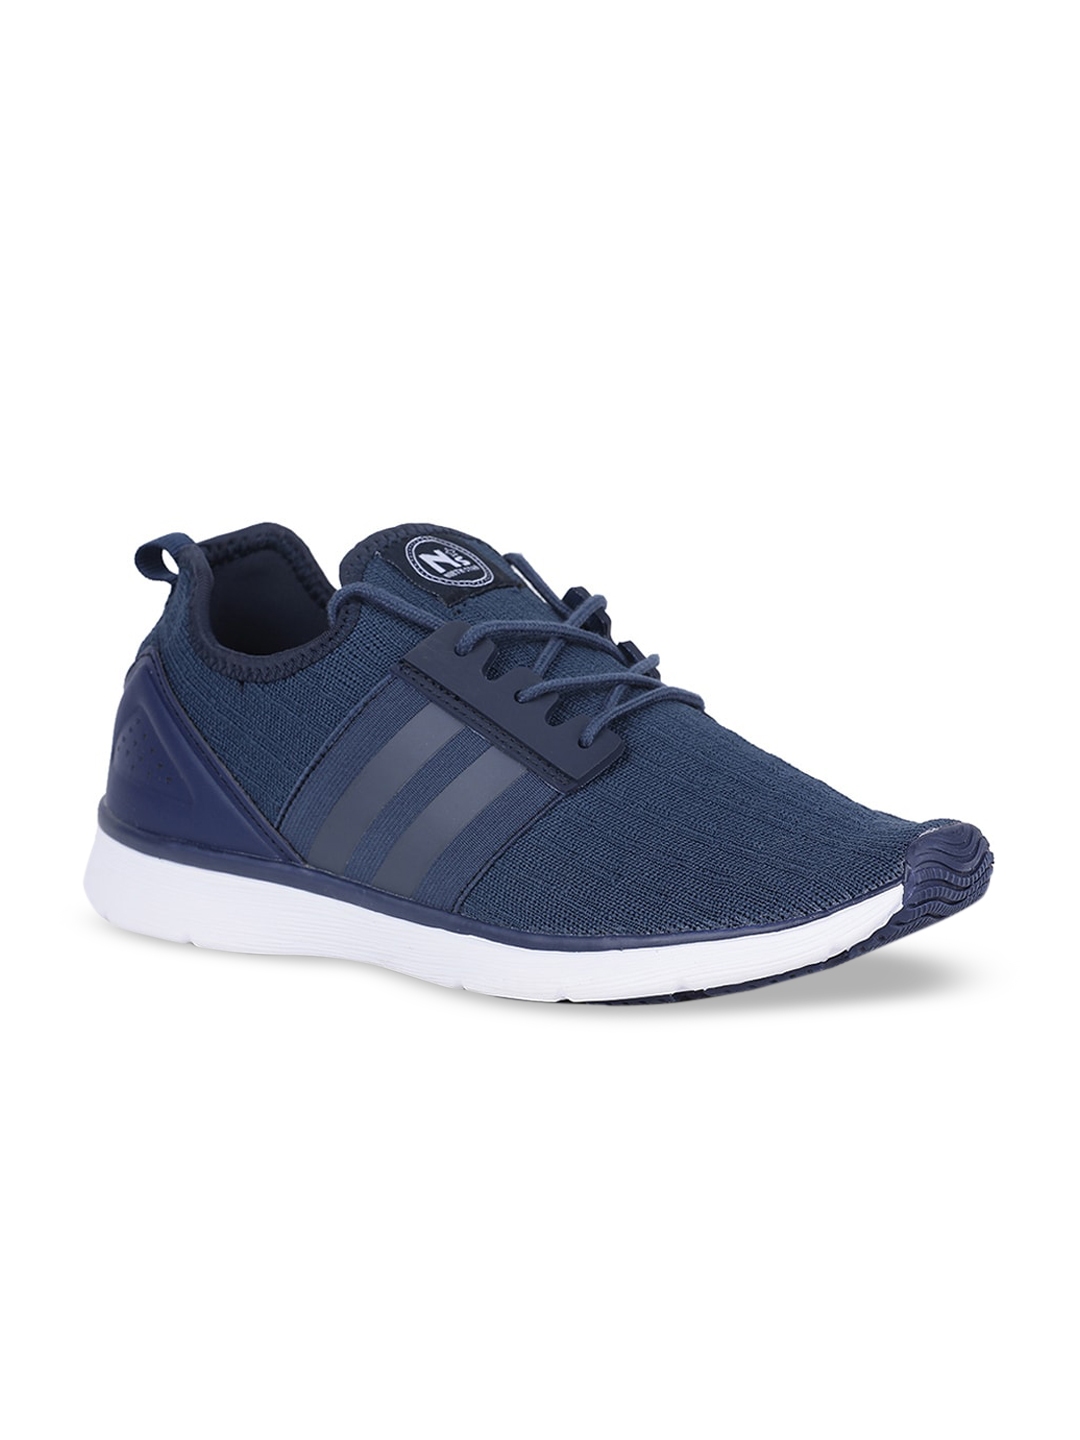 Buy North Star Women Navy Blue Sneakers - Casual Shoes for Women ...